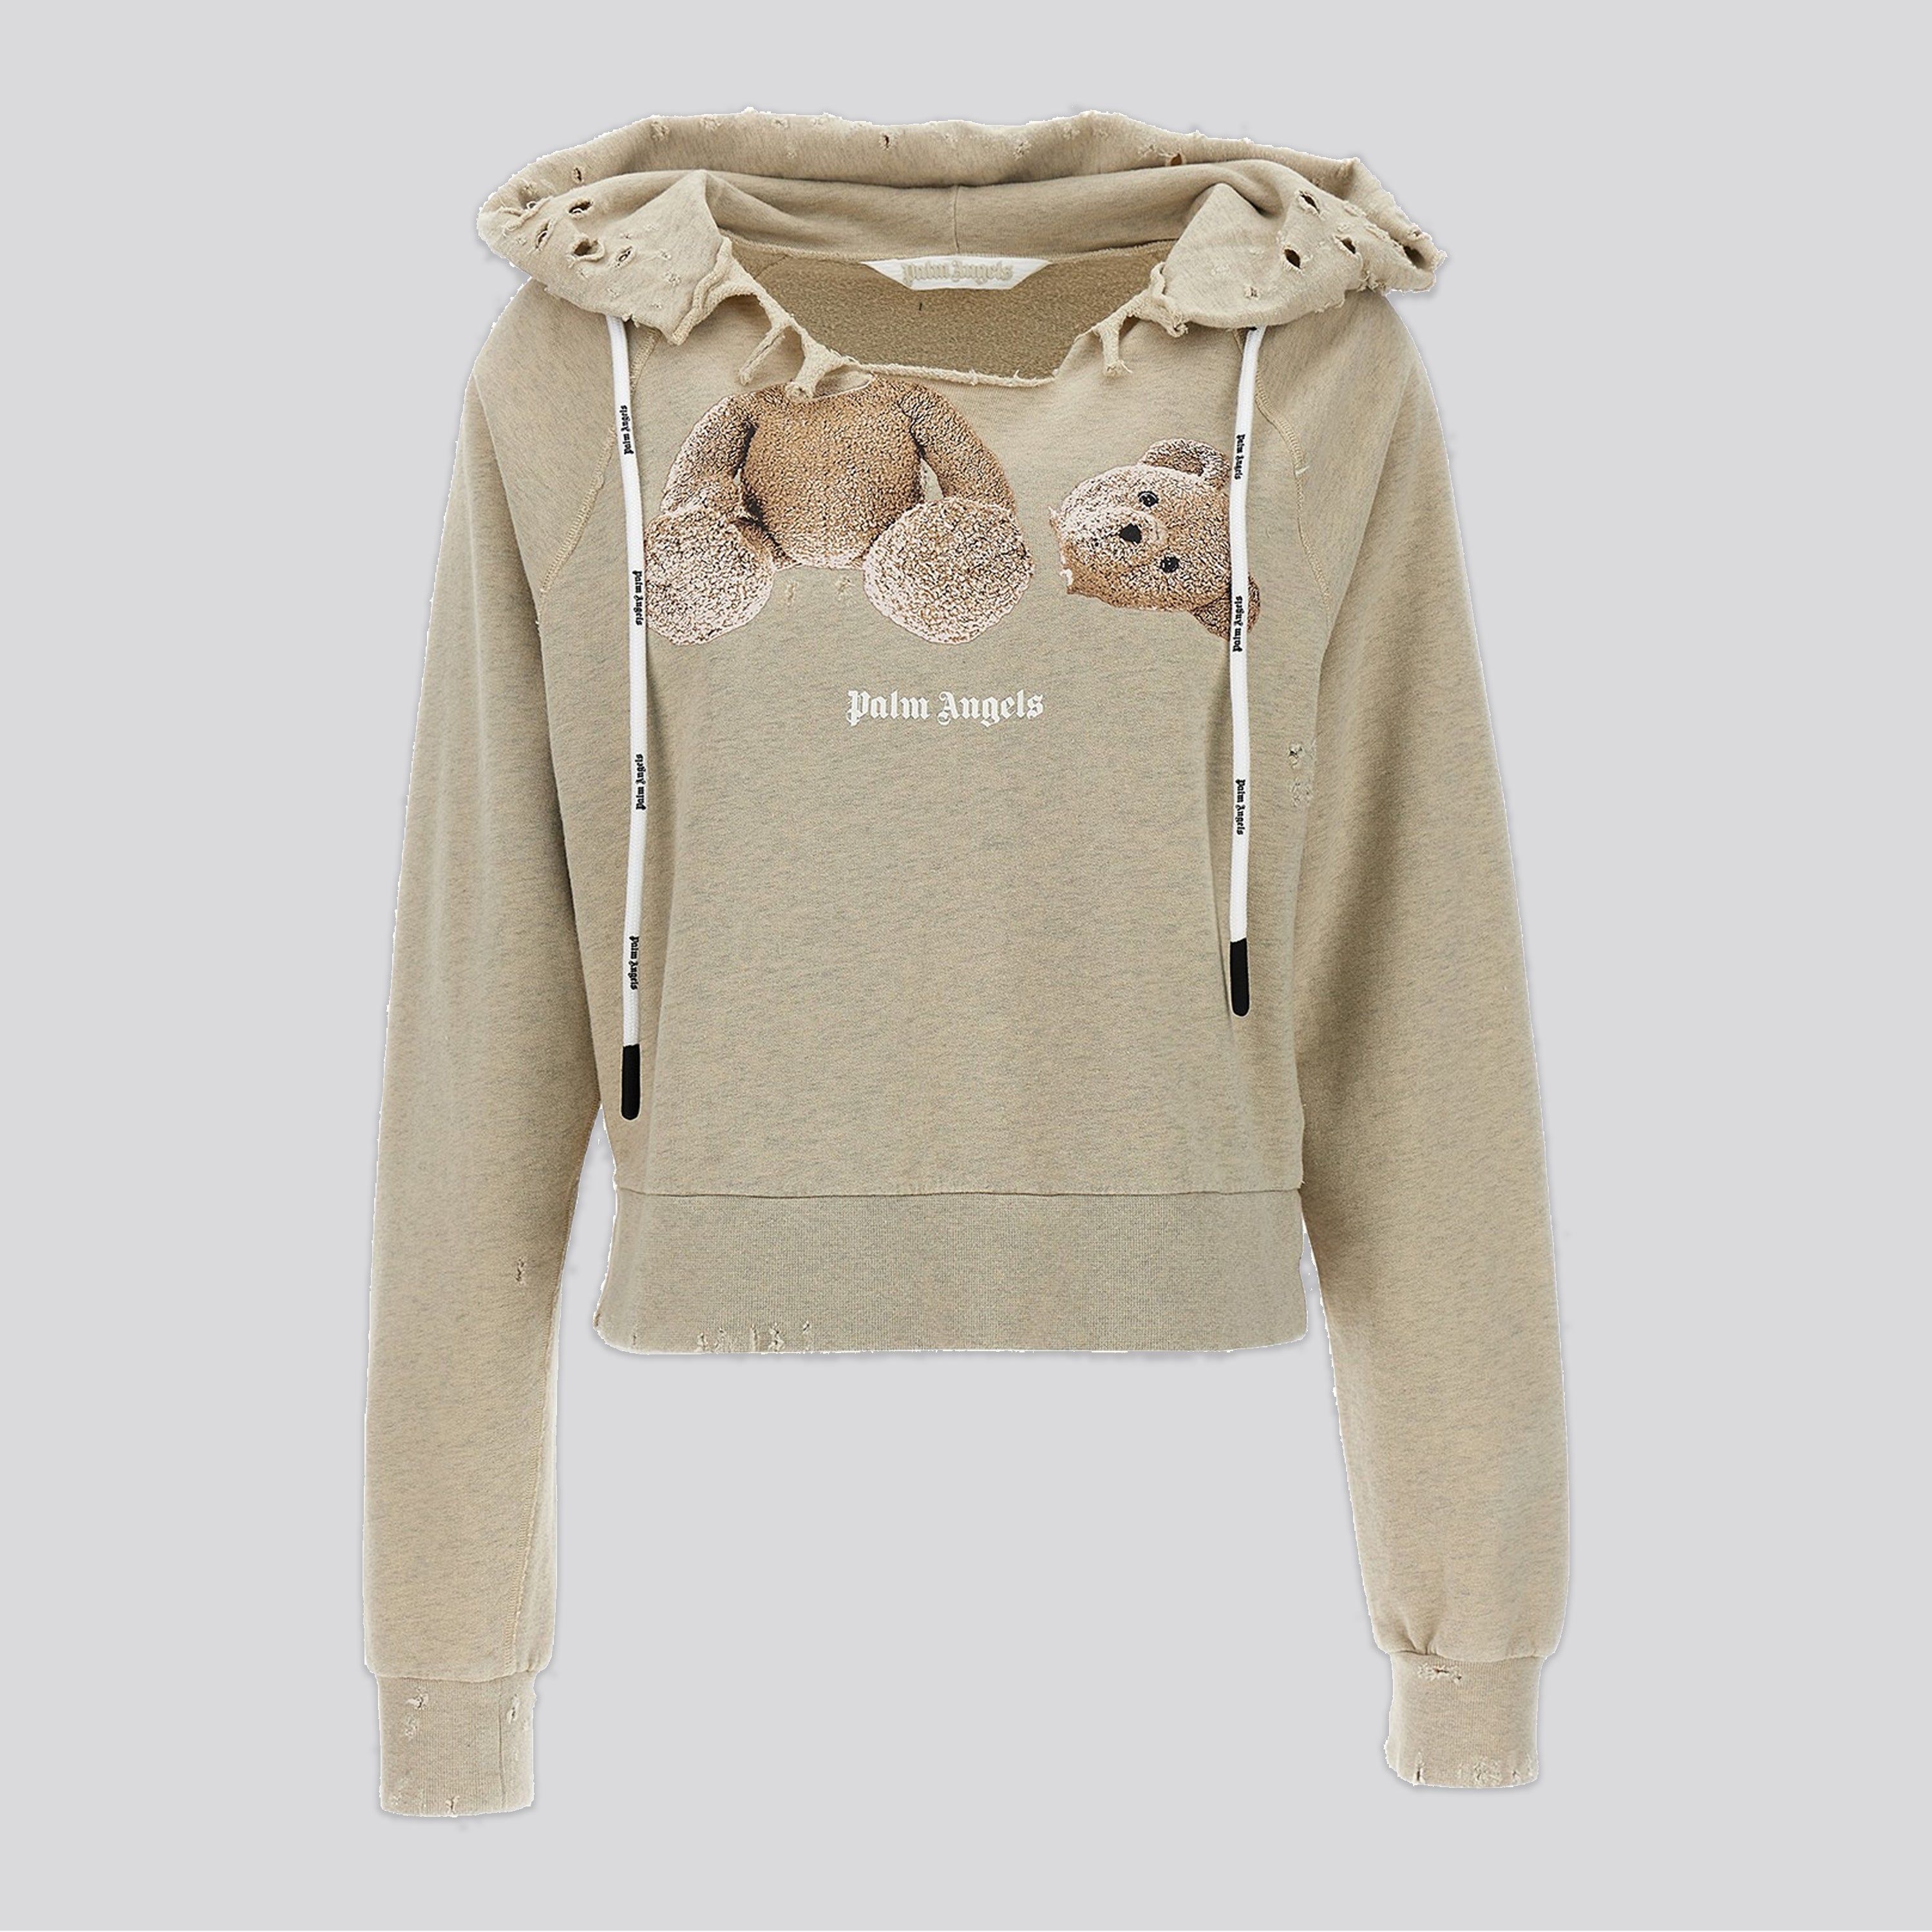 Buzo Tipo Hoodie Beige Palm Angels Ripped